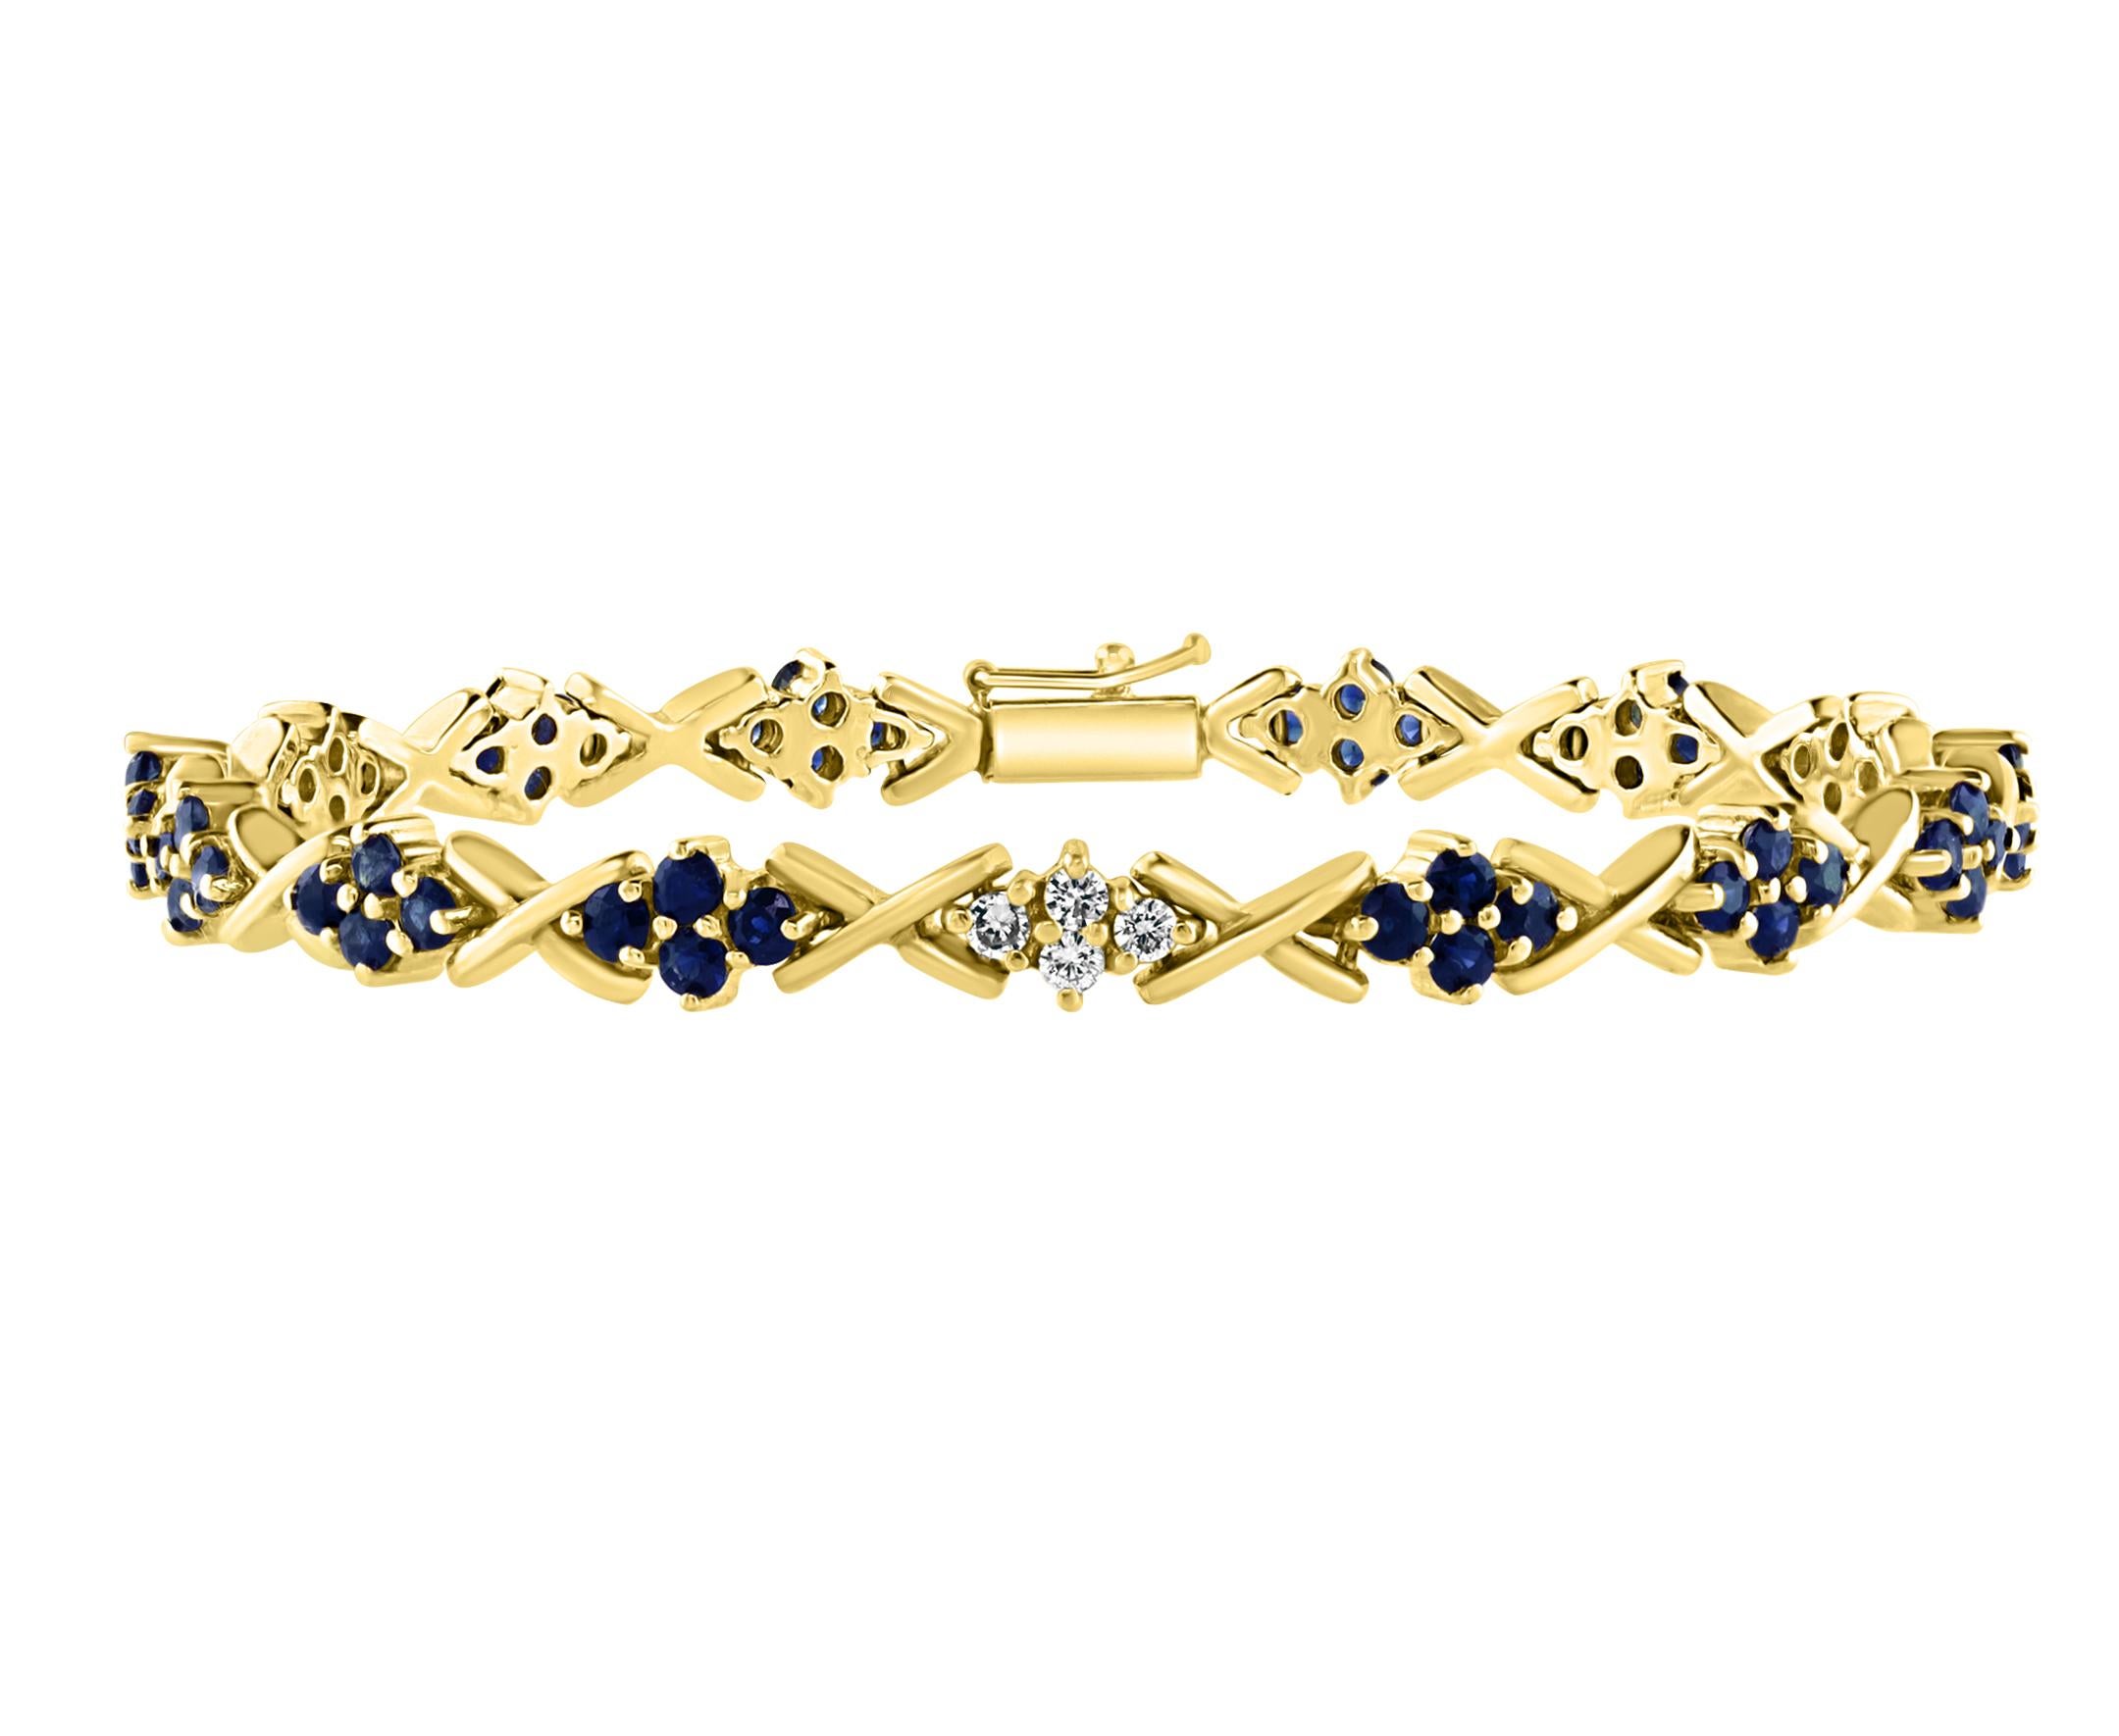  Natural Blue Sapphire &  Diamond Tennis Bracelet 14 Karat Yellow Gold 7  Inch
This exceptionally affordable Tennis  bracelet has  multiple small round stones of sapphire set in a diamond shape 
Total weight of Sapphire is approximately 3 carat.